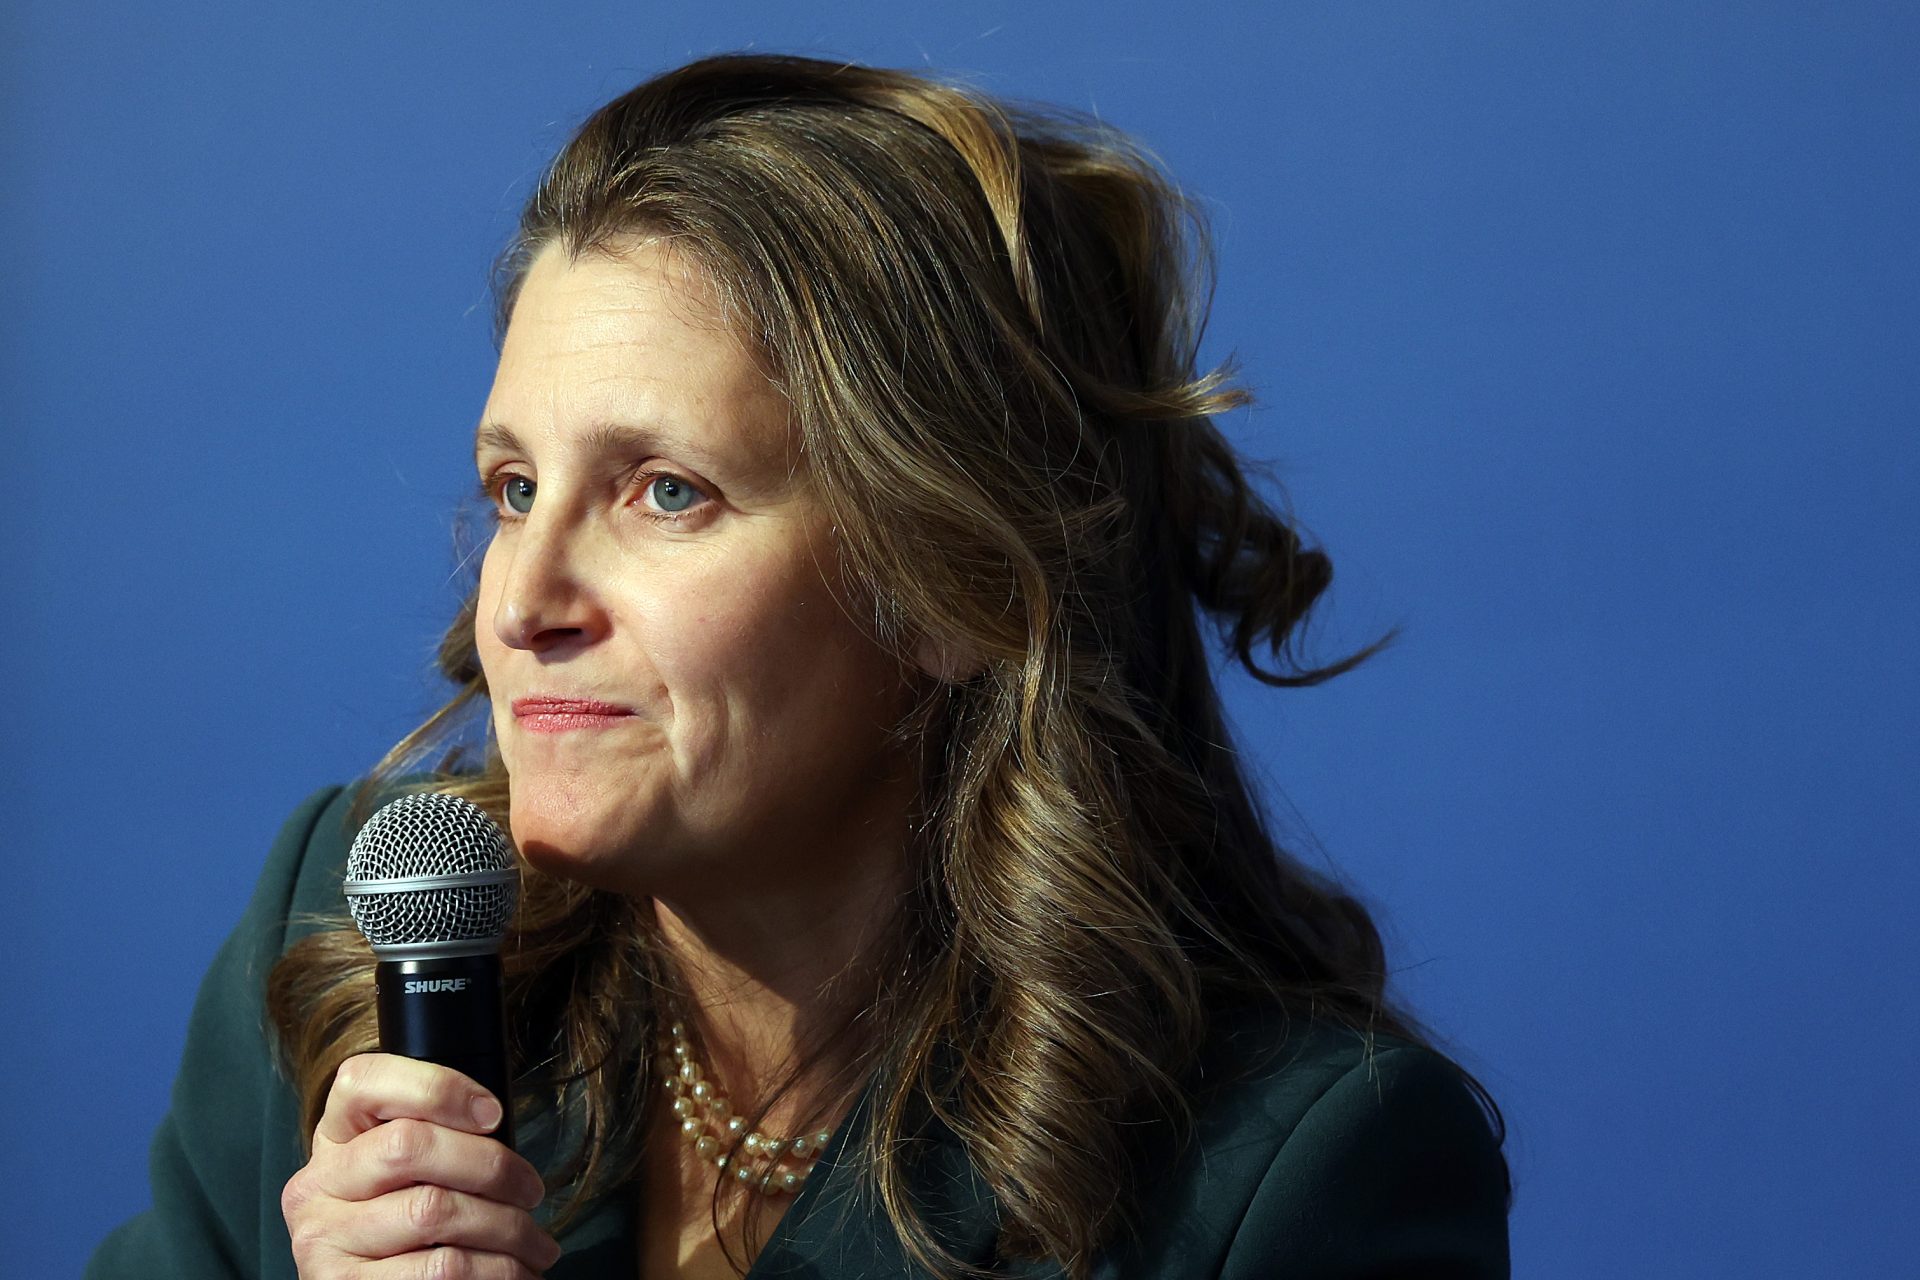 Meet Chrystia Freeland: the women who could soon succeed Trudeau